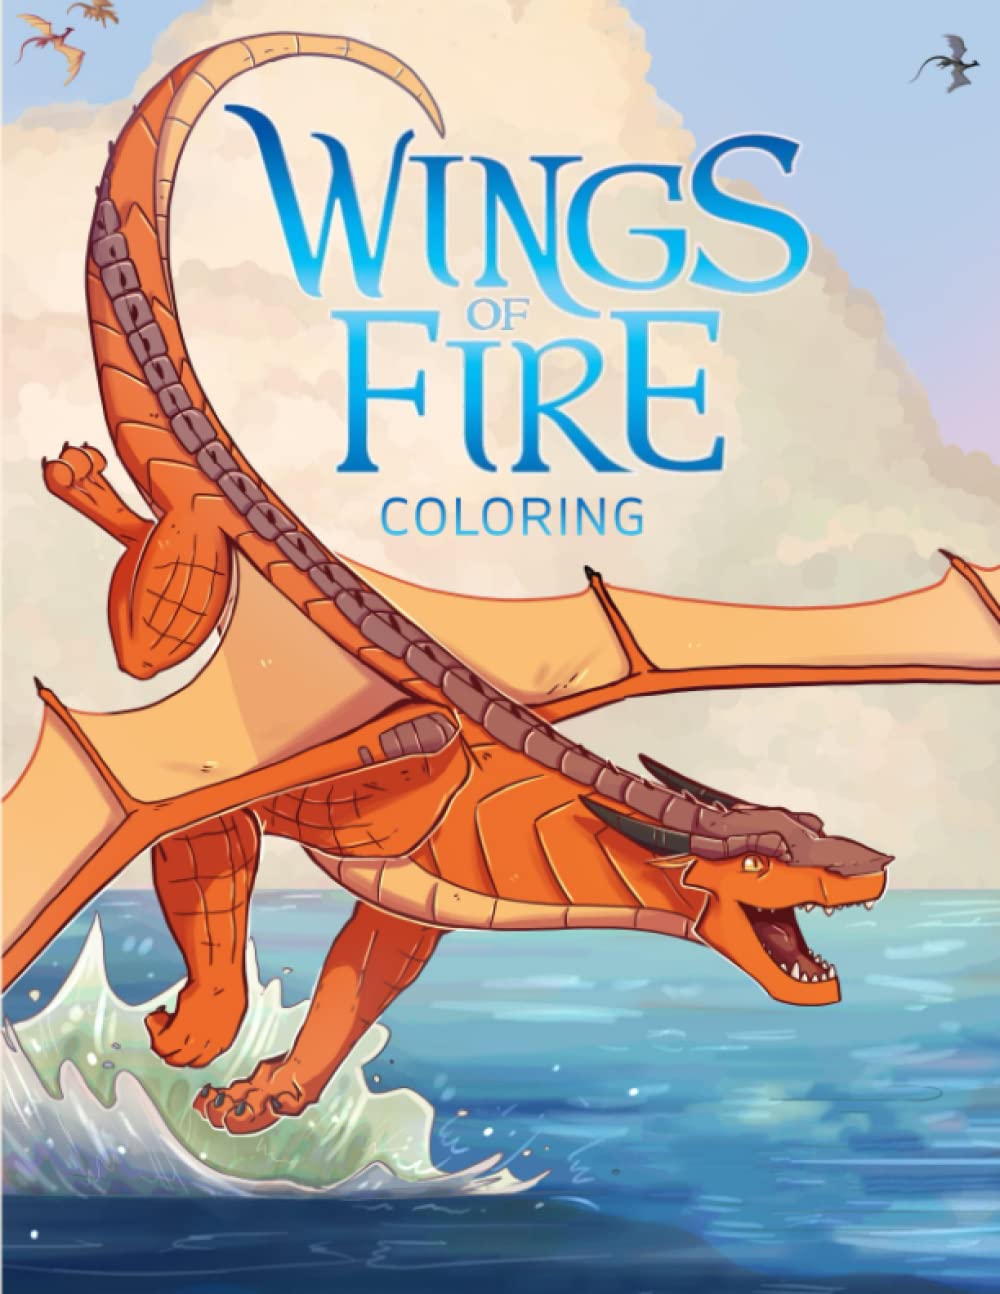 Áºãngs of fãre coloring book awesome coloring pages edition for kids fans newest áºãngs of fãre drawings by blow studio